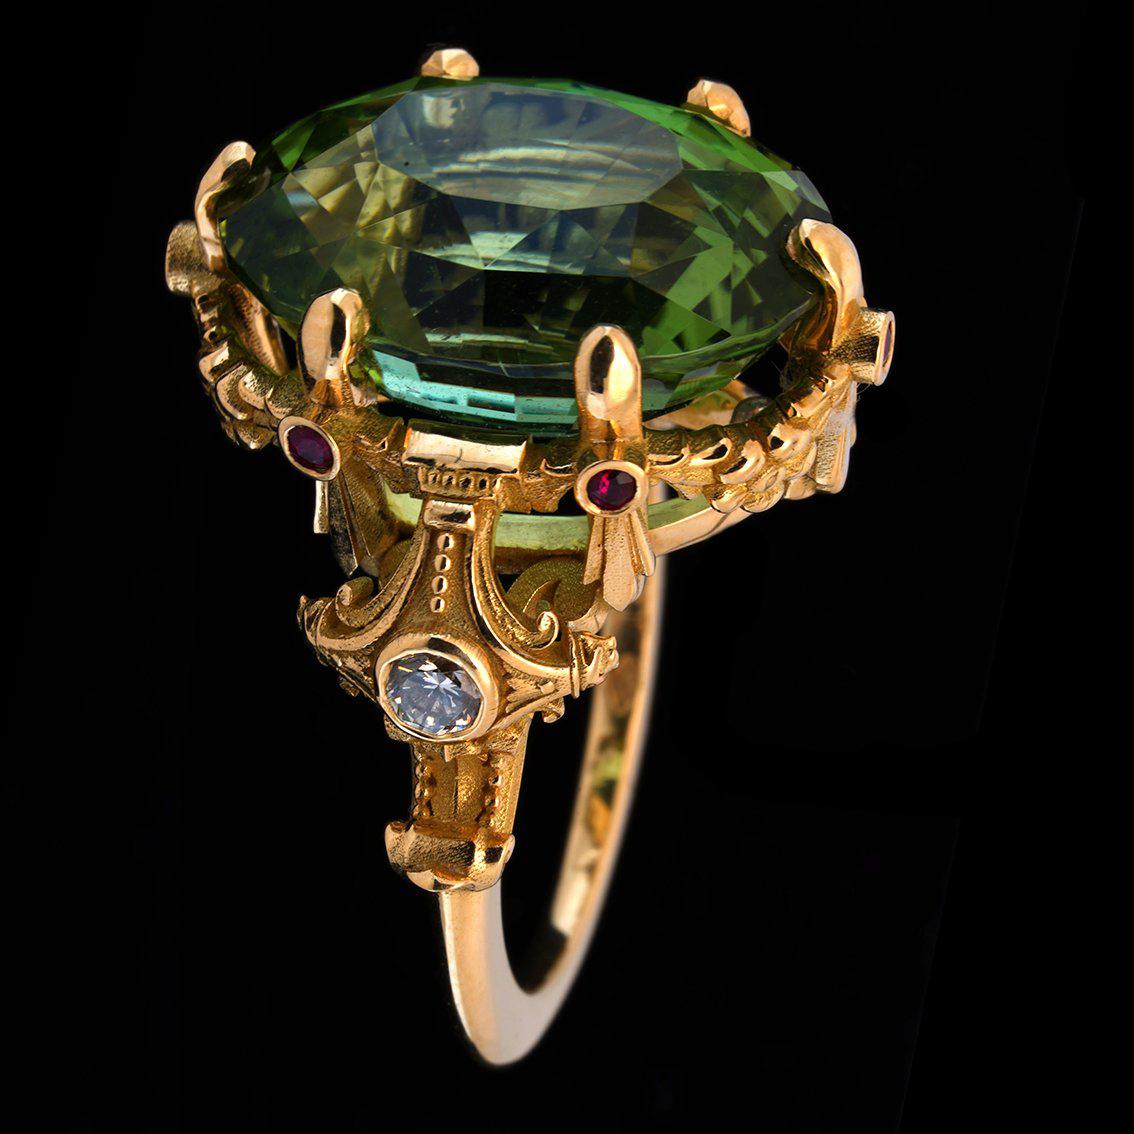 21ct Green Tourmaline, Rubies, Diamonds, & 18k Yellow Gold Antique Style Ring For Sale 3